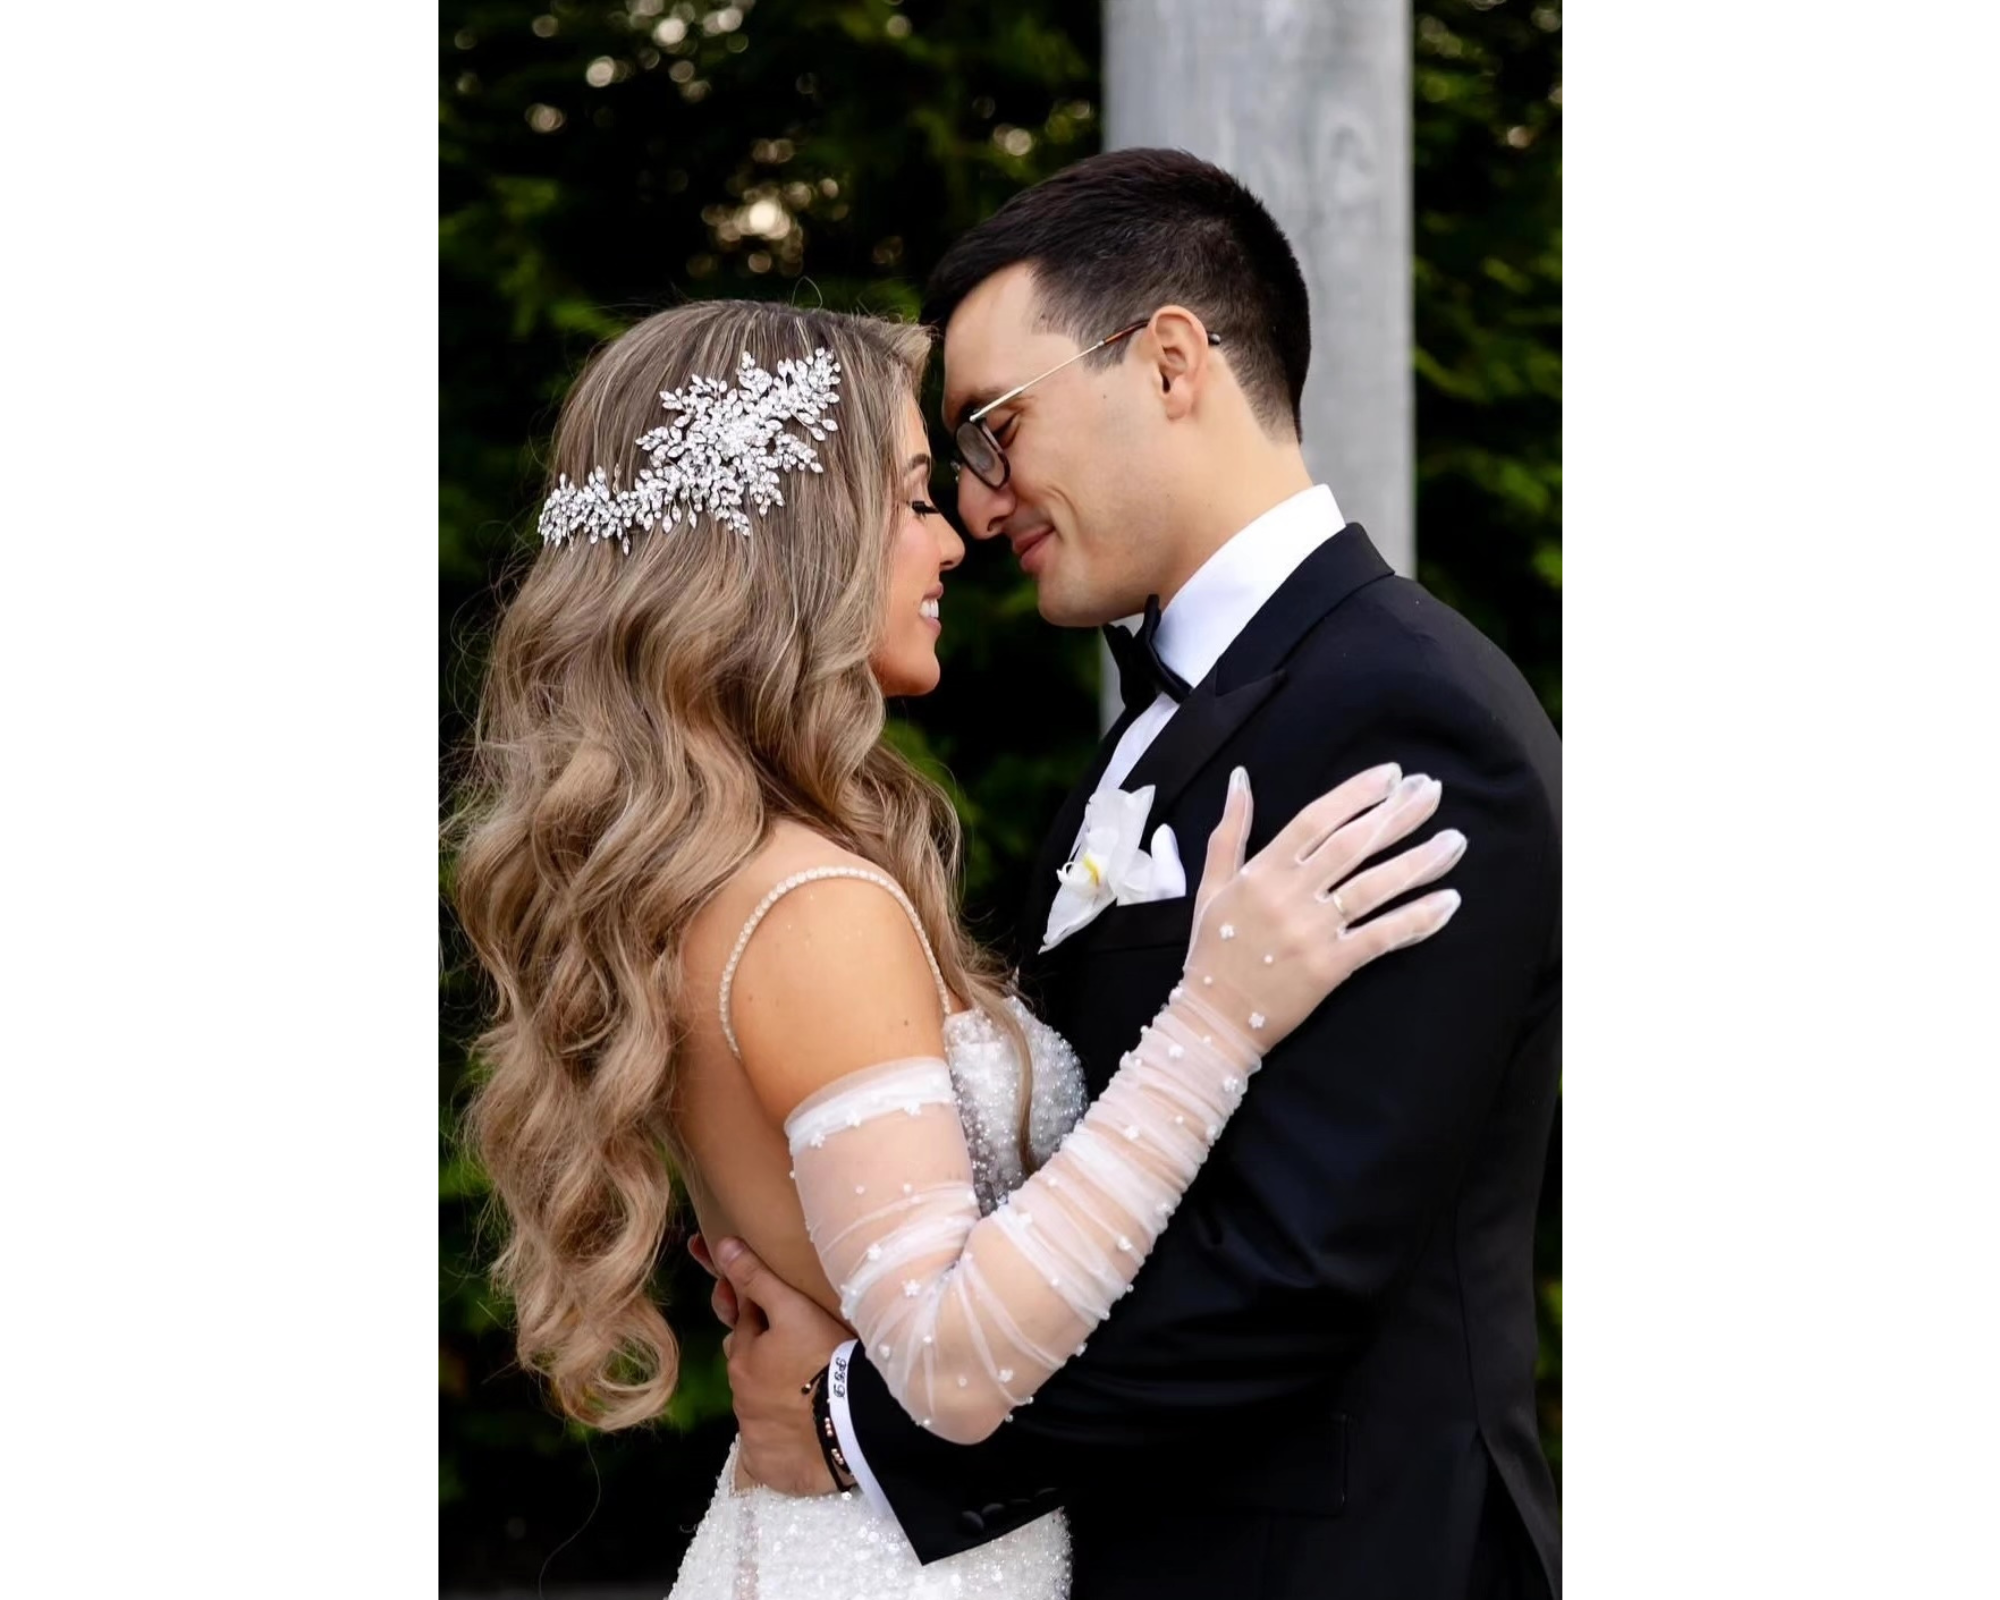 Our beautiful bride with her new husband! Ioanna is wearing a Swarovski crystal bridal hair vine, sheer gloves, and her stunning wedding dress.